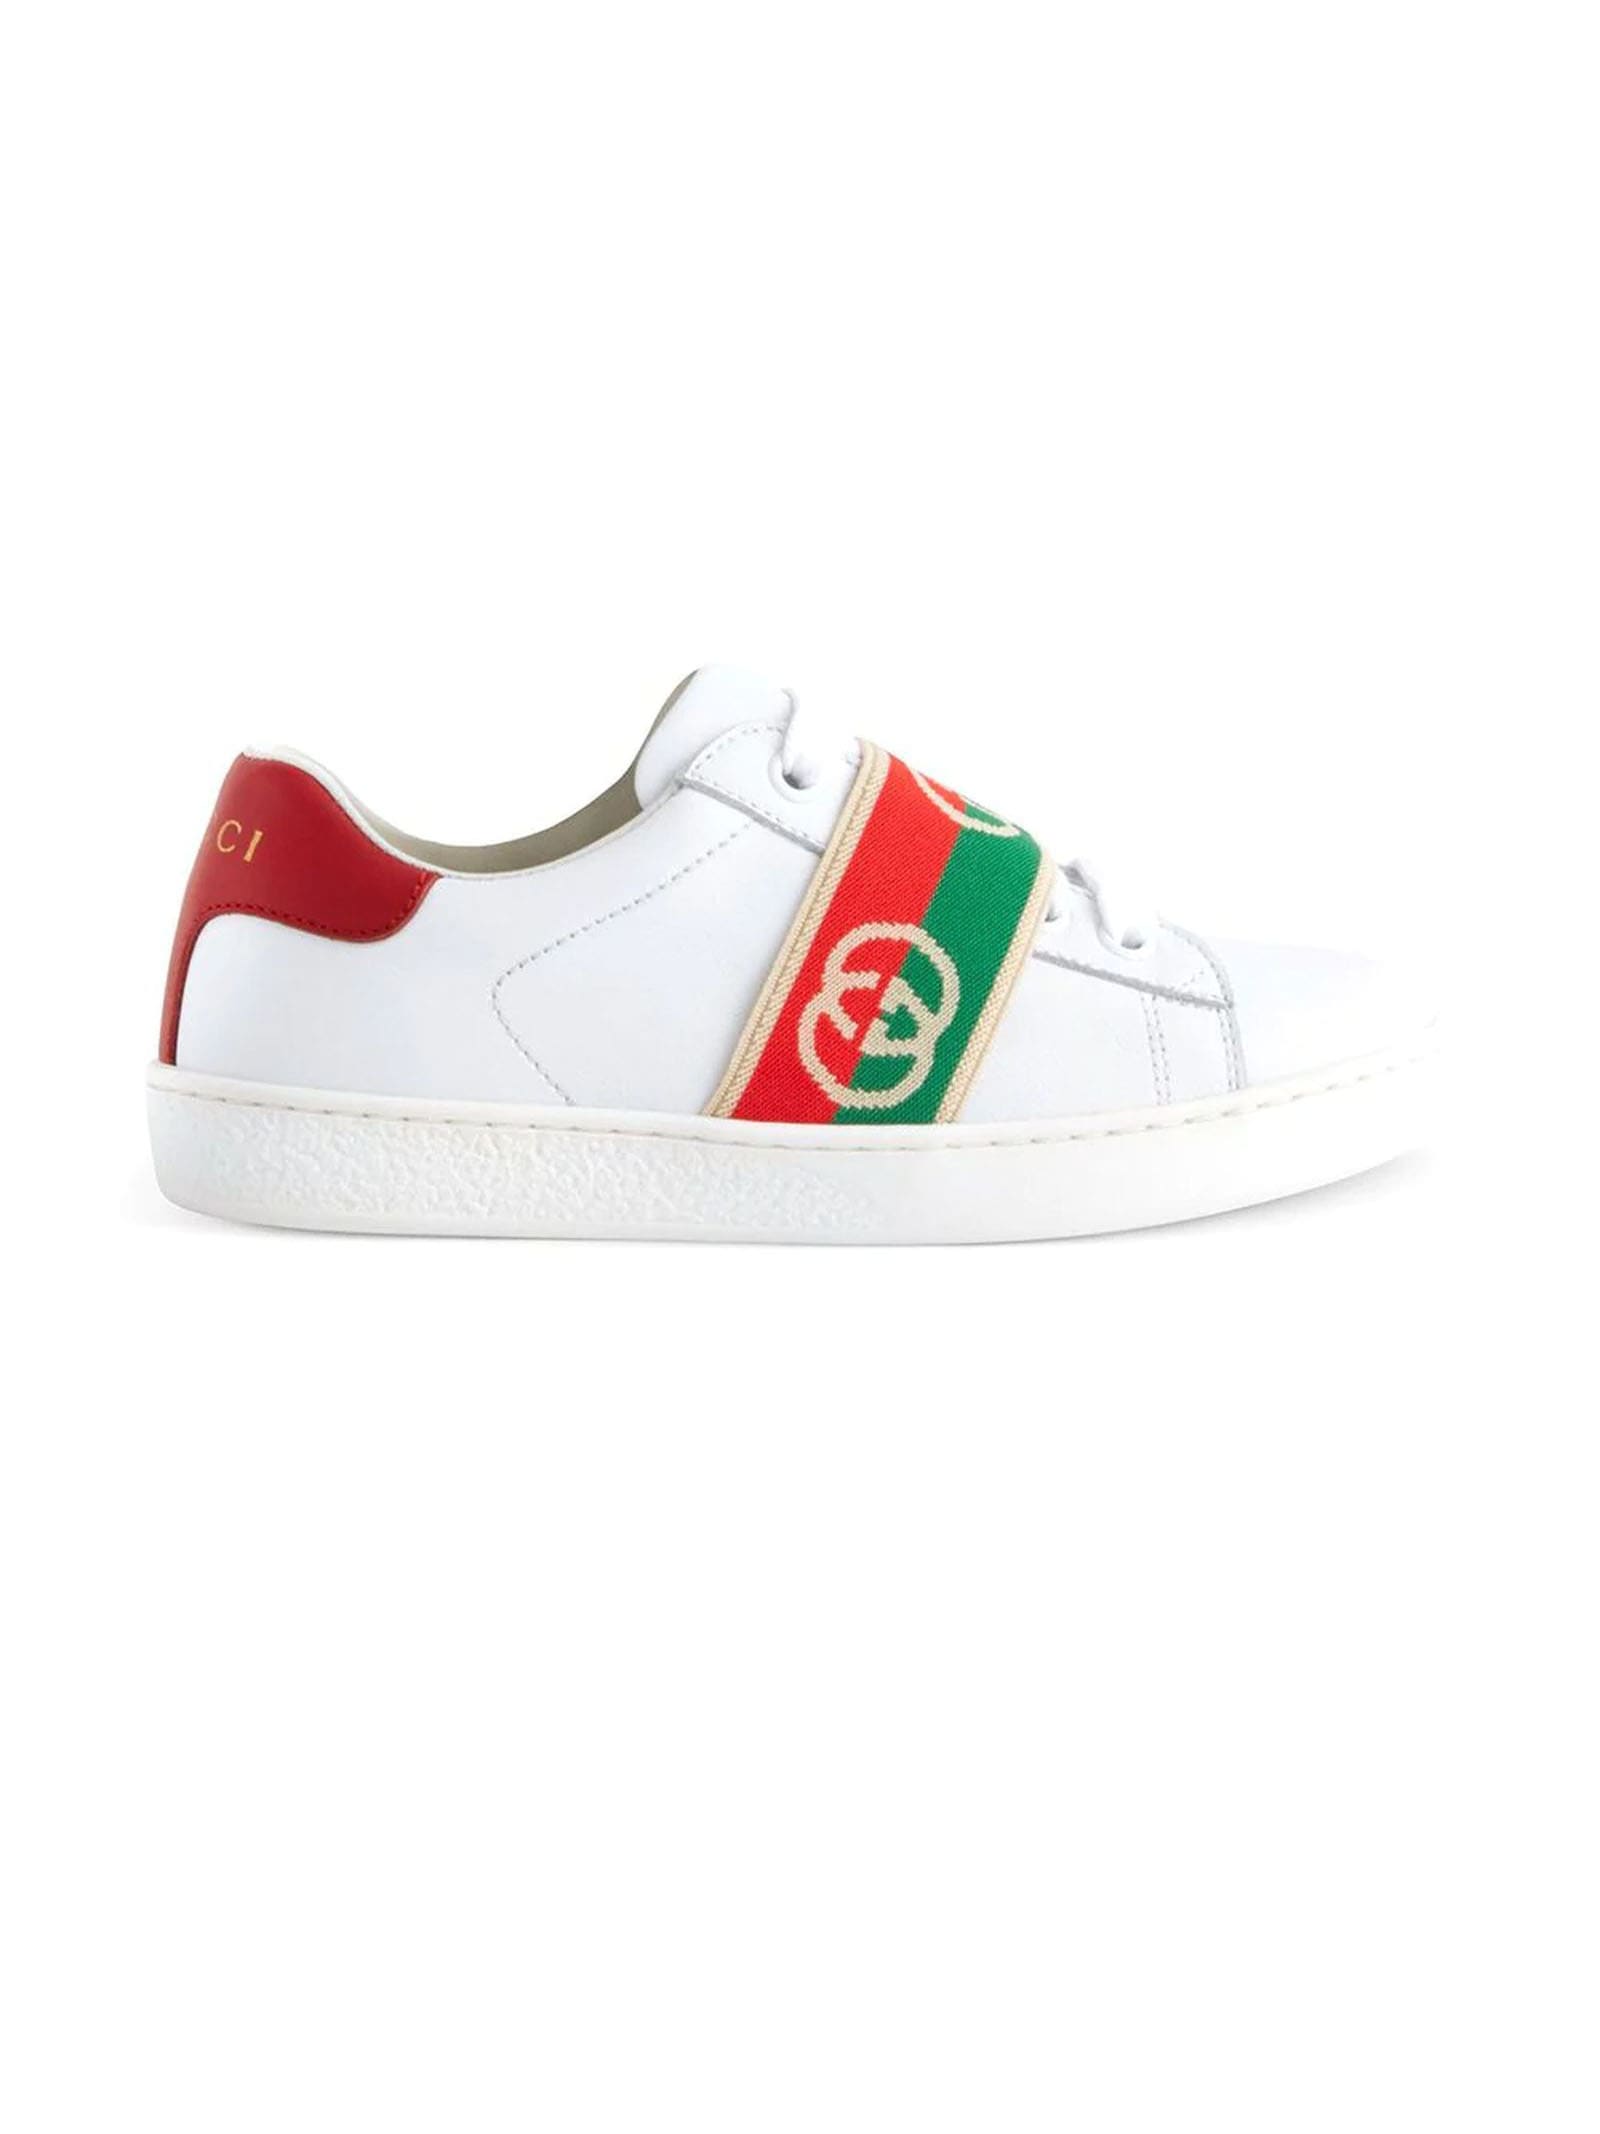 Gucci Childrens Ace Sneaker With Interlocking G